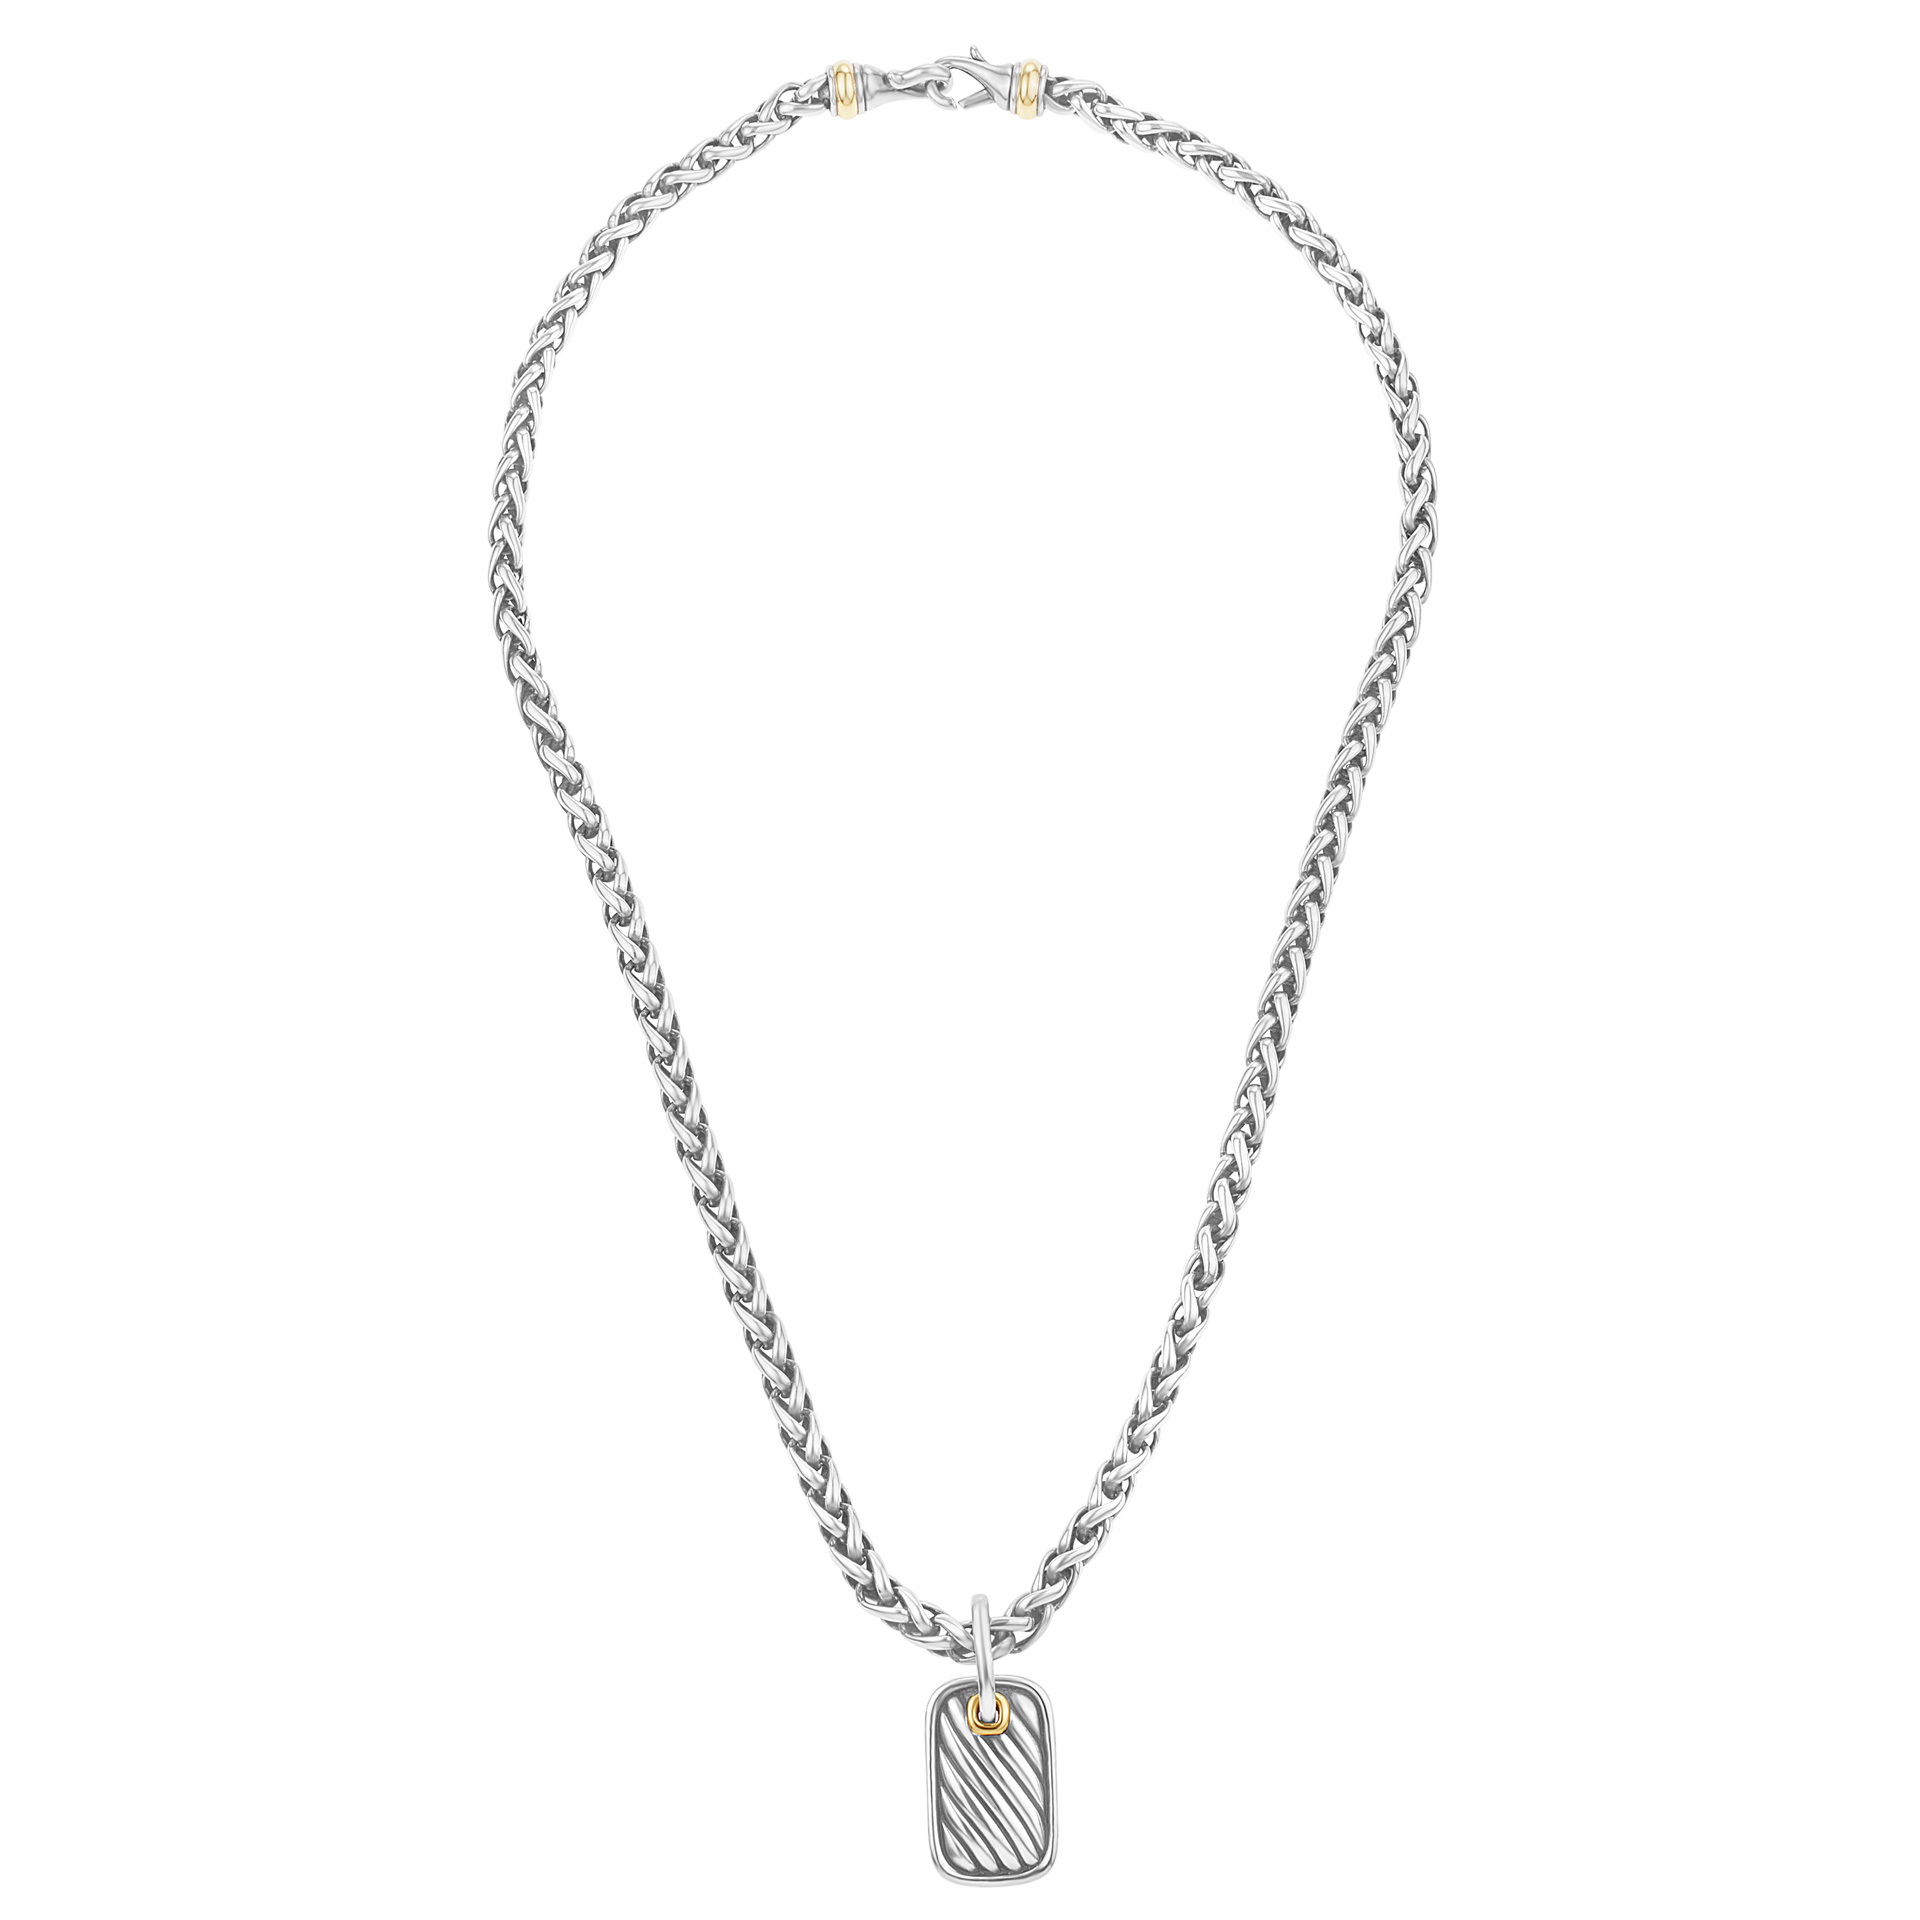 David Yurman chain with pendant in silver and 14k yellow gold image 1